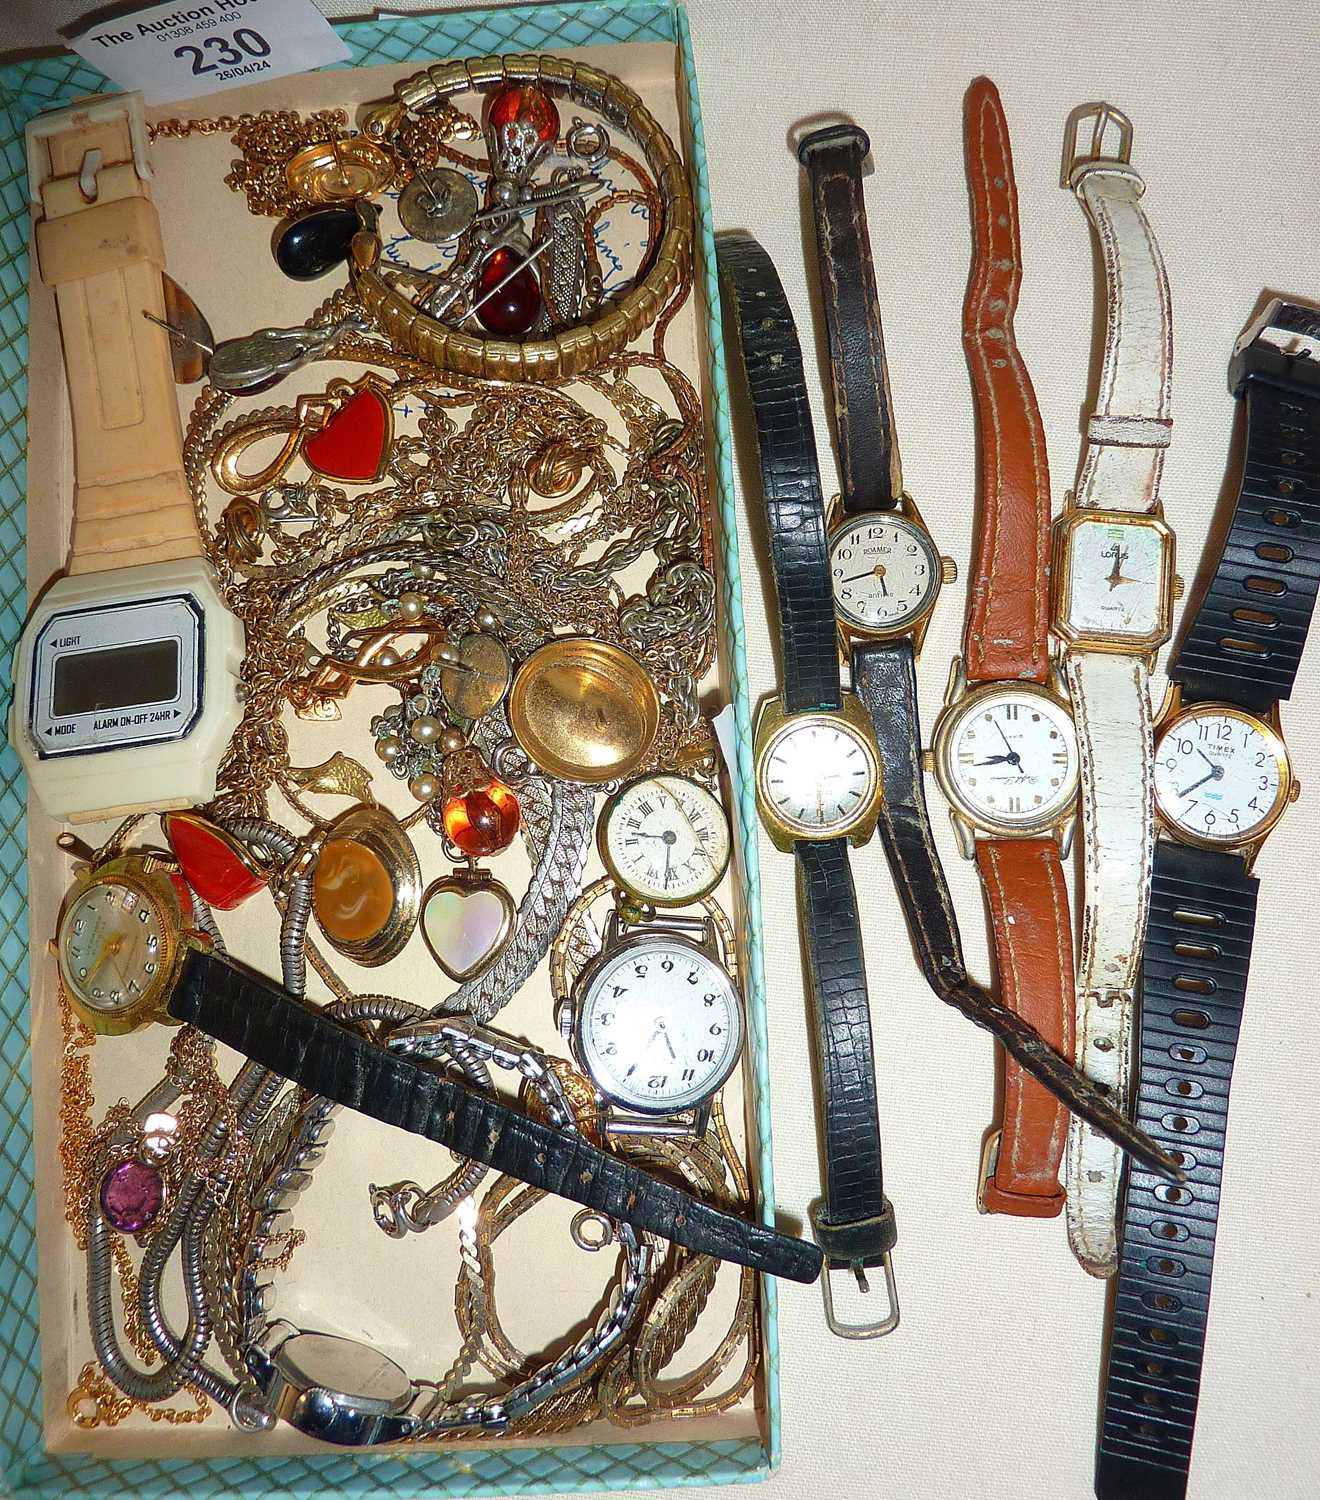 Vintage costume jewellery and wrist watches